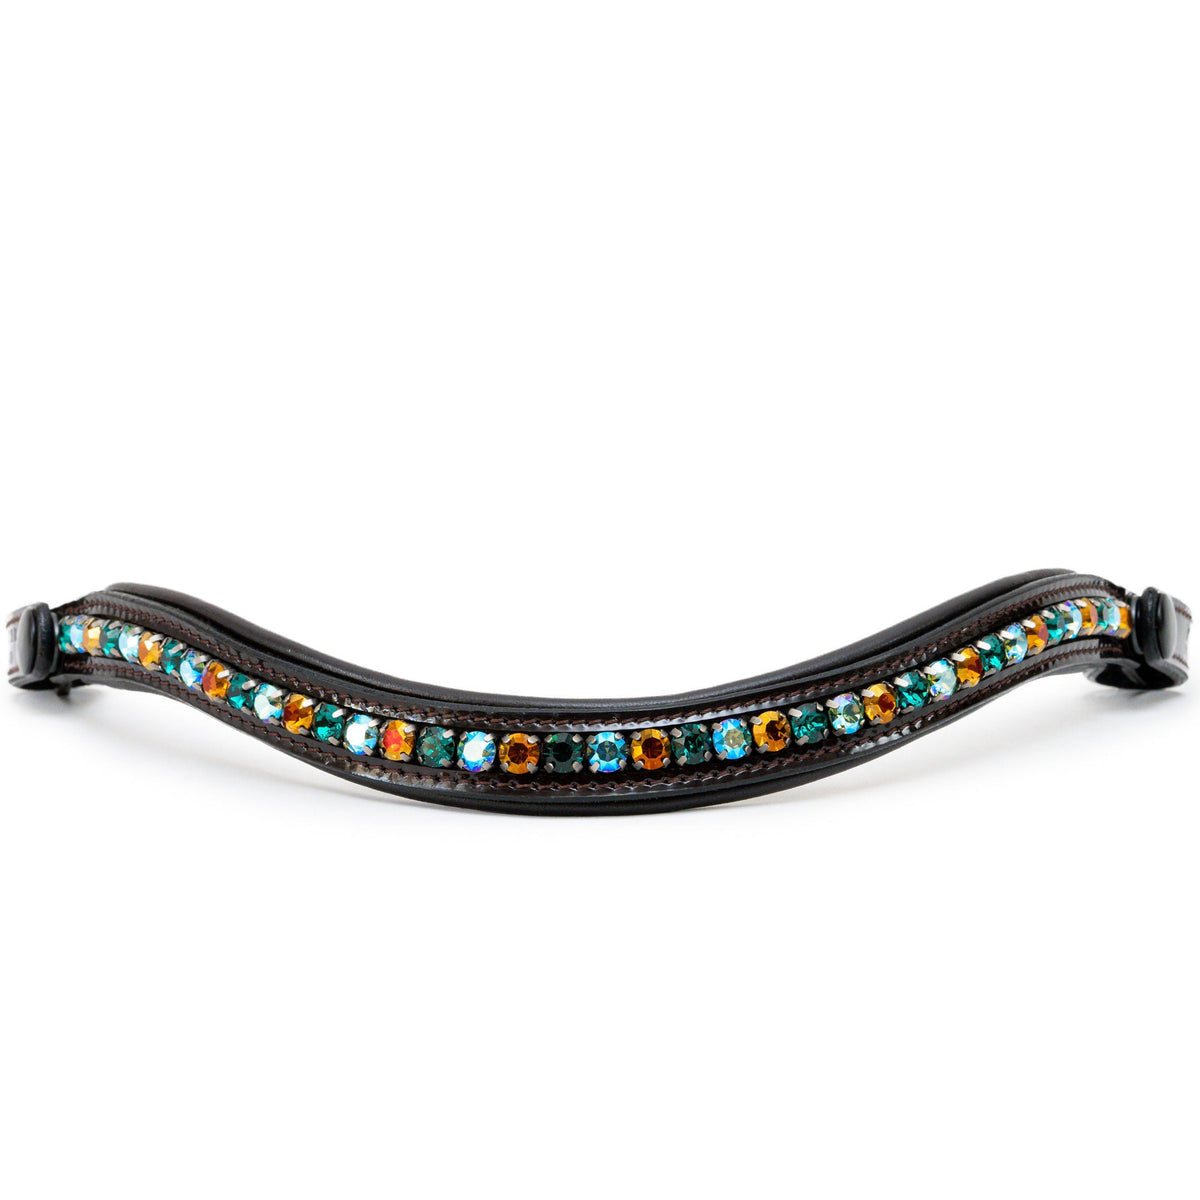 Limited Edition Yellowstone Wave Browband with Snaps